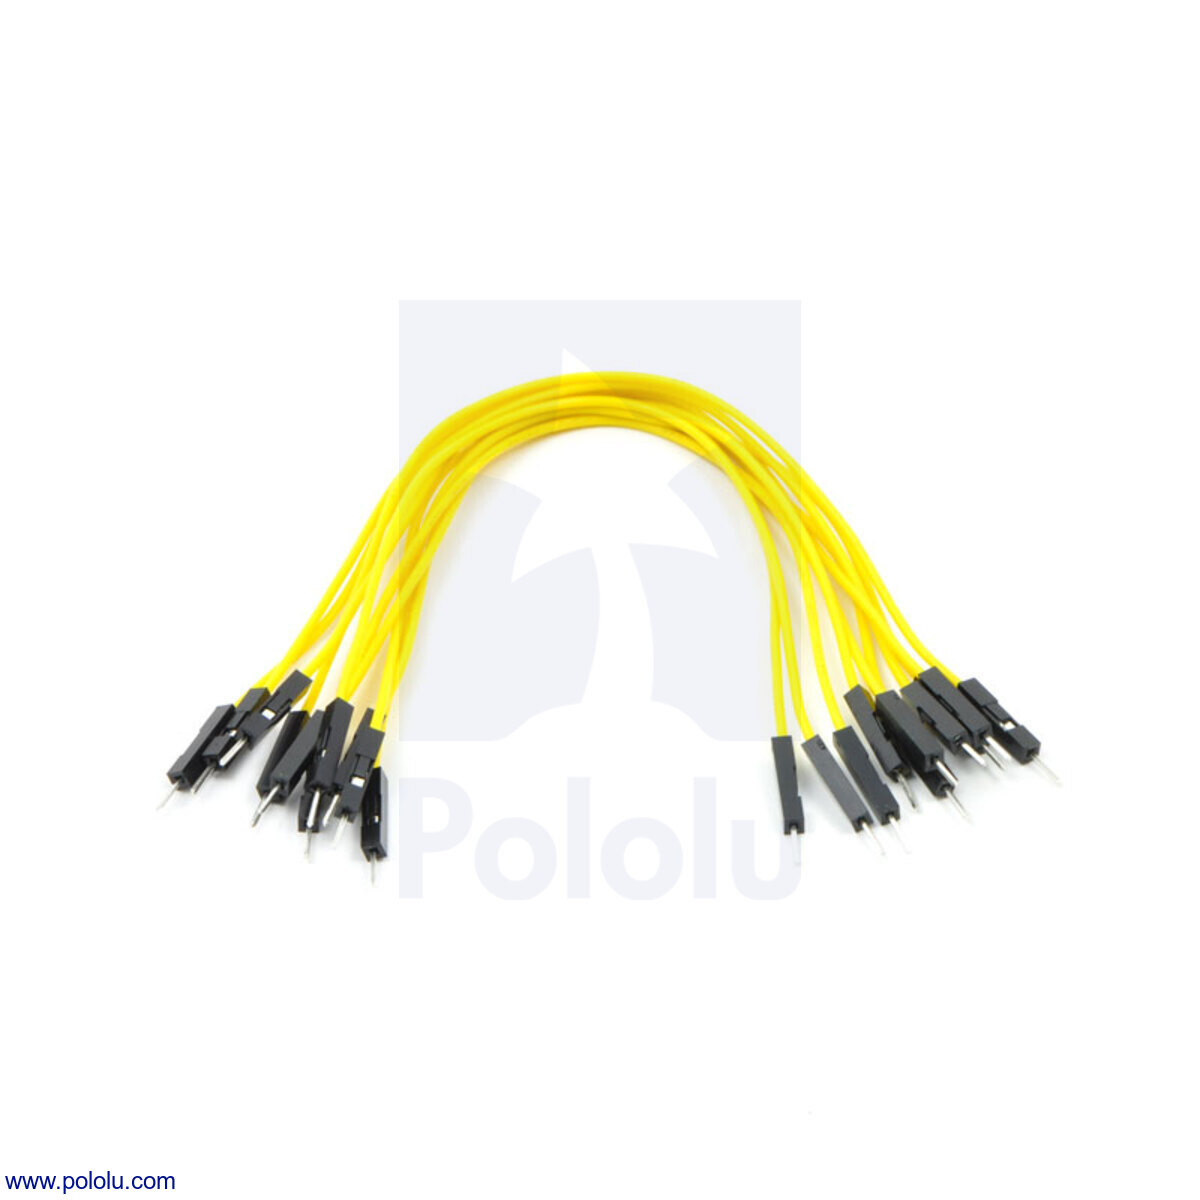 Jumper Wire, 24 AWG, 3 Lengths Available - Stranded or Solid - 10 Colors -  200 Pieces Total